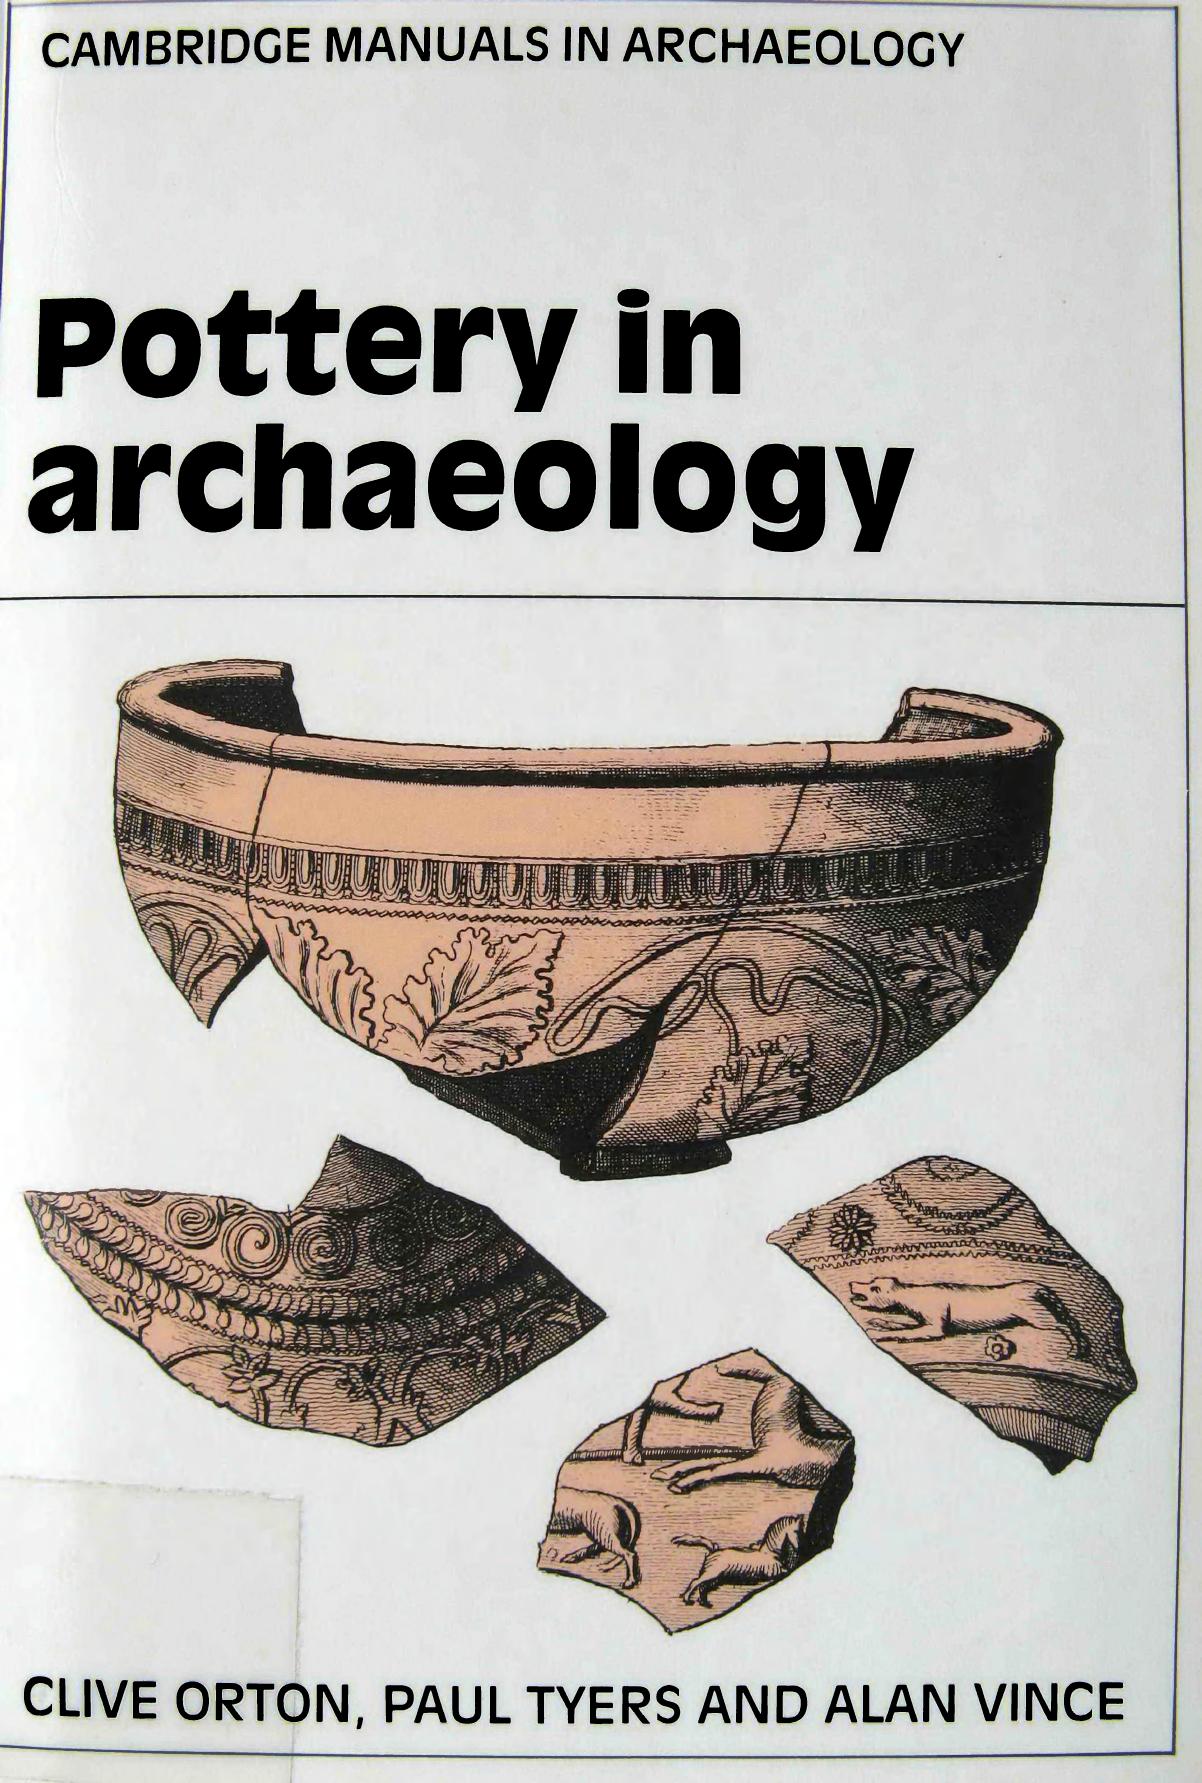 Pottery in archaeology 2016